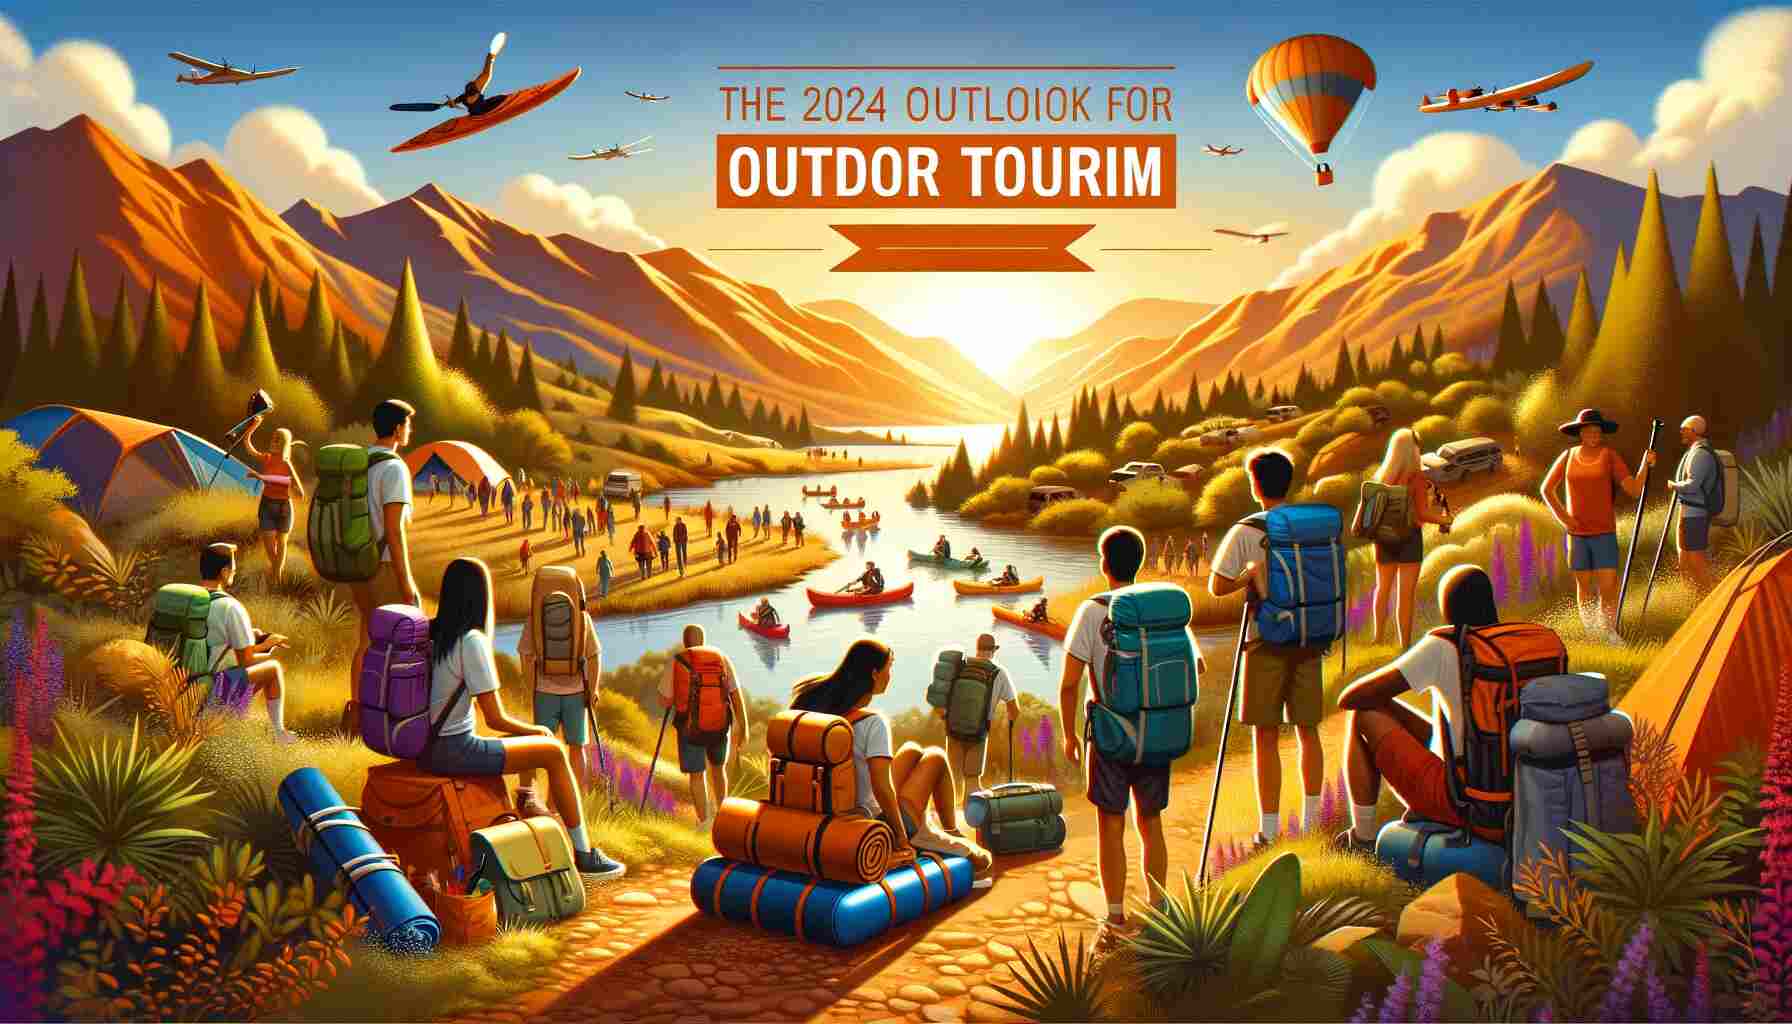 An image depicting the outlook for outdoor tourism in 2024, featuring a group of diverse tourists of various descents and genders, equipped with backpacks and gear. They are engaged in activities like hiking, camping, and kayaking amidst stunning natural landscapes. The setting sun casts a warm, golden glow, symbolizing a bright and promising future for outdoor tourism.